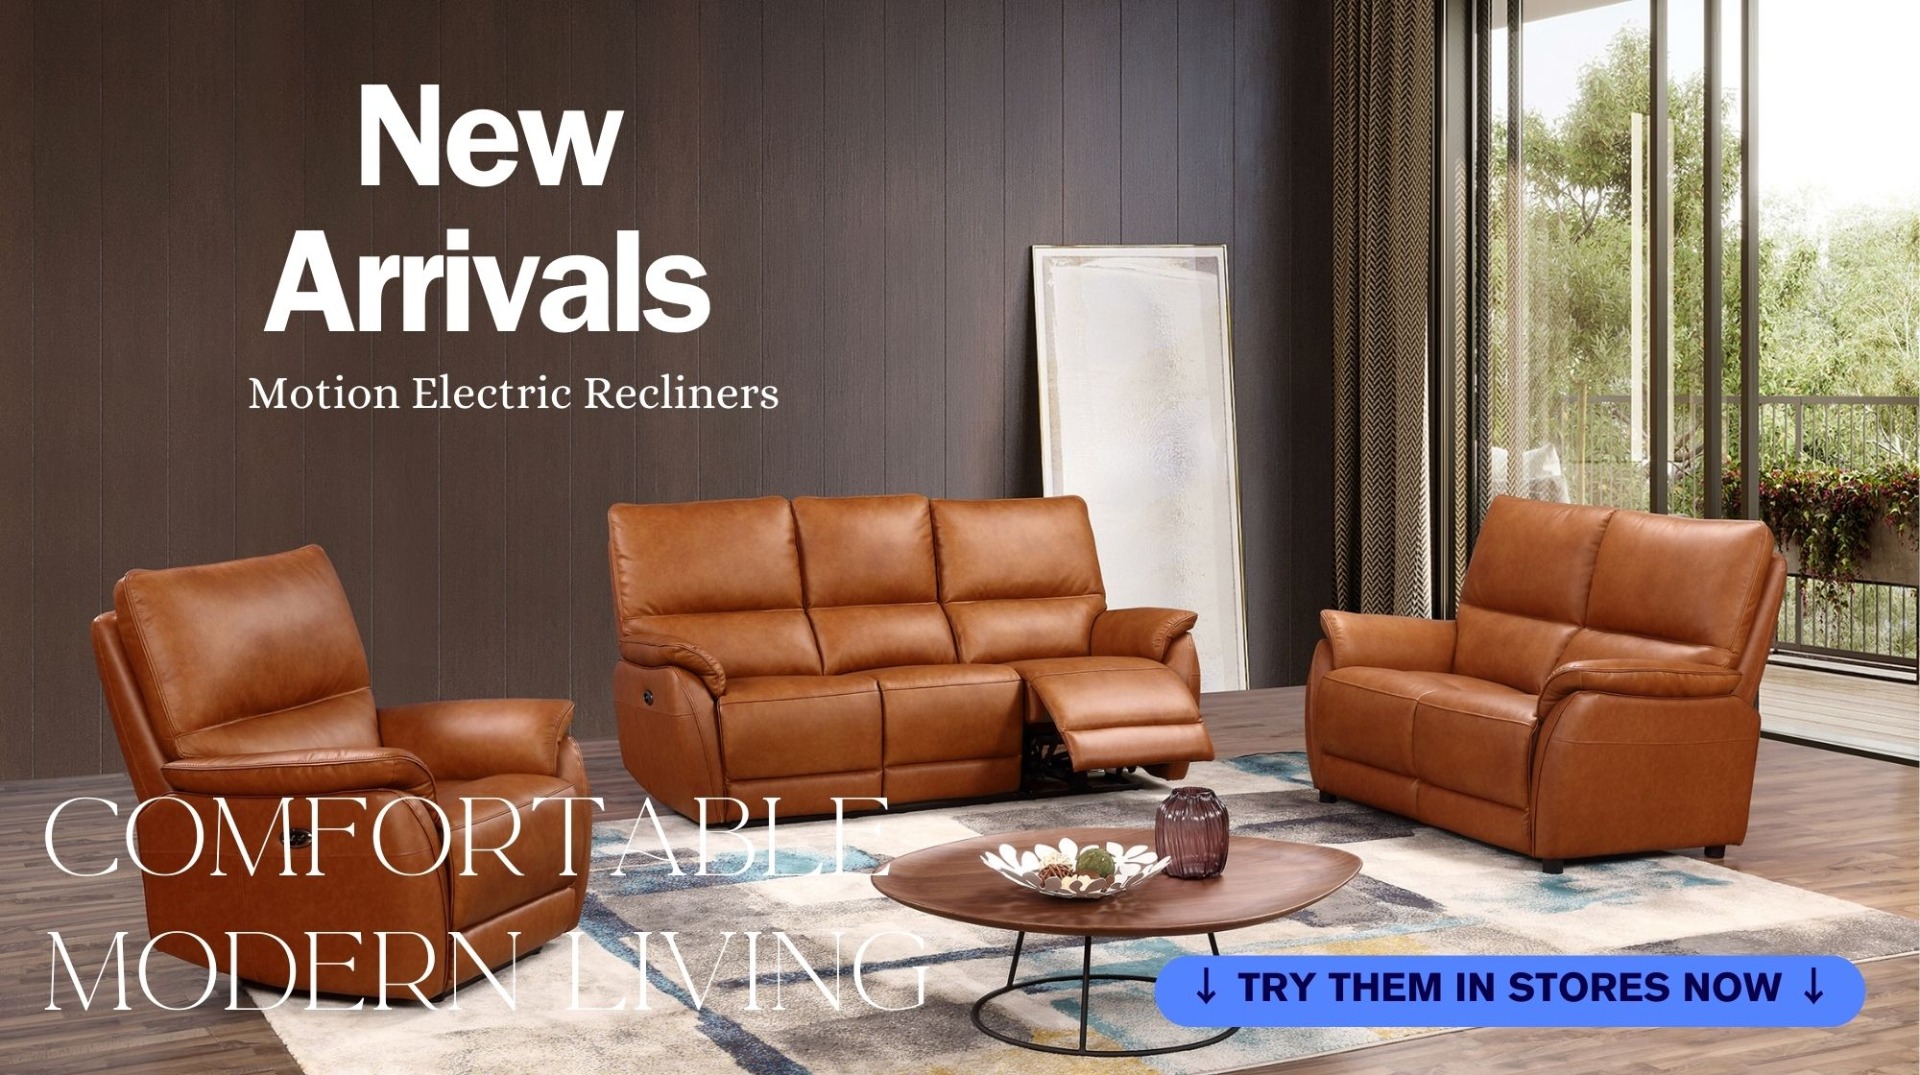 New Arrivals Motion Recliners Your Comfortable Modern Living